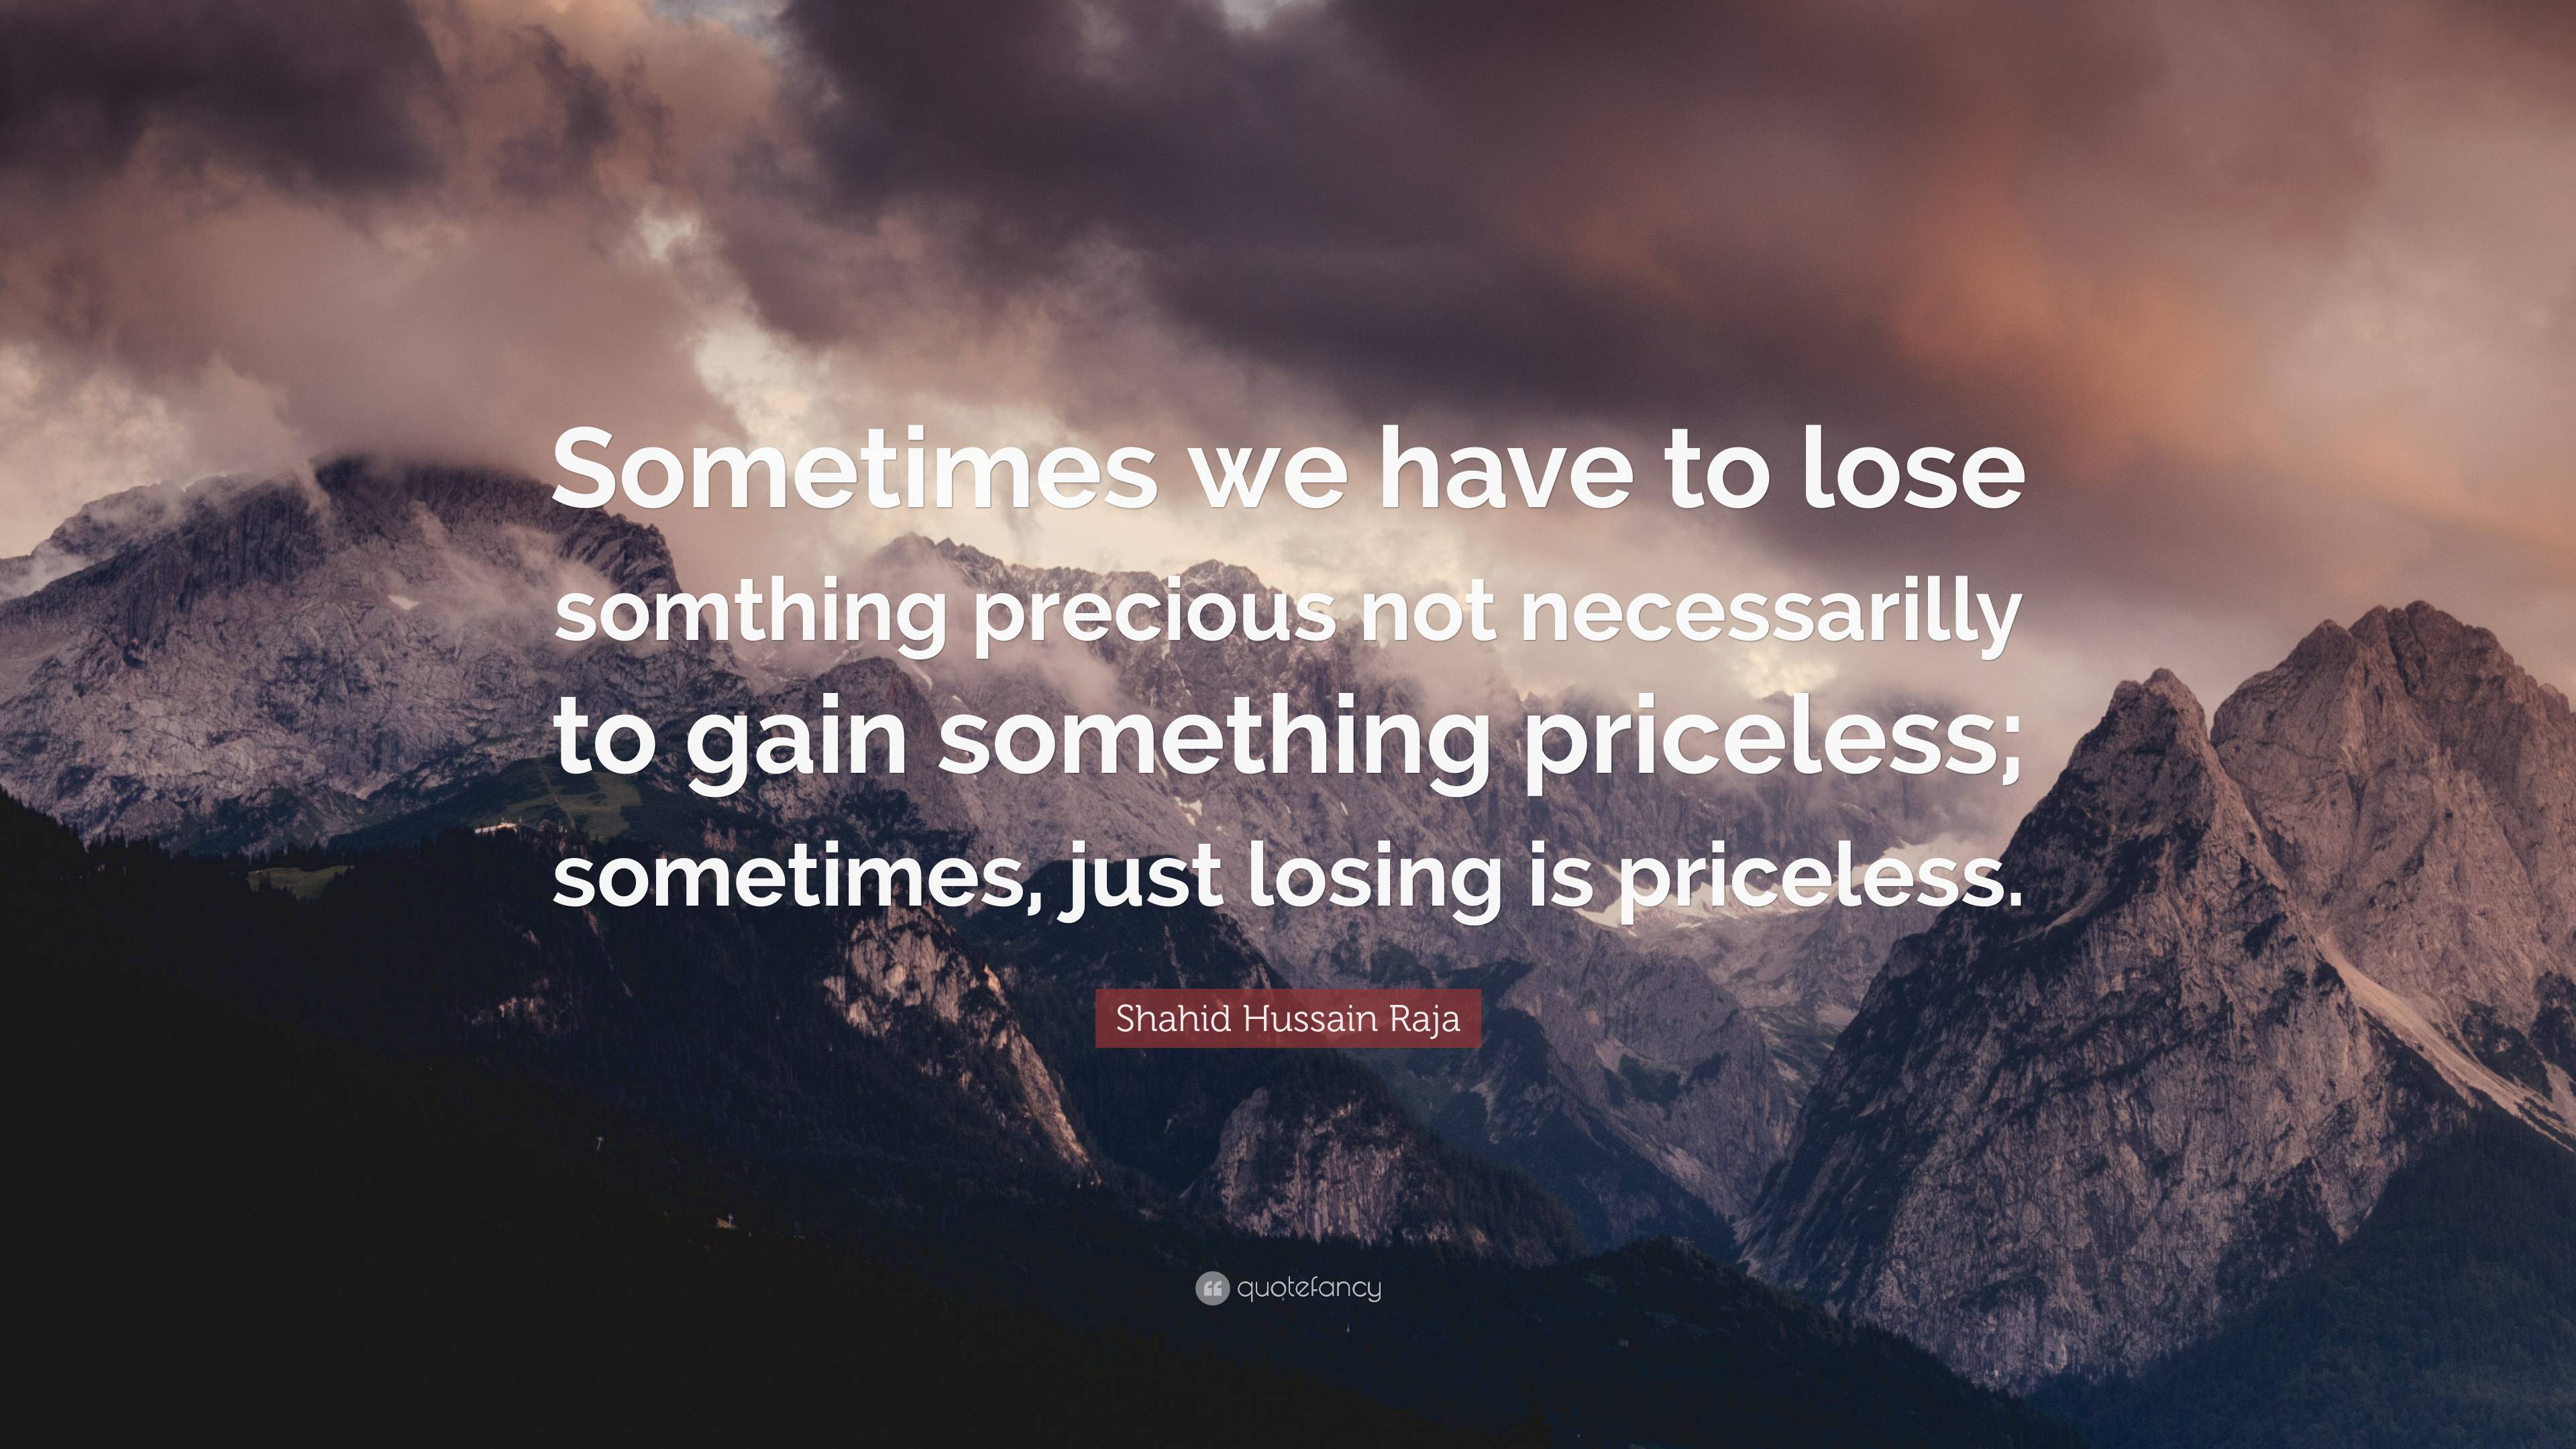 Shahid Hussain Raja Quote “sometimes We Have To Lose Somthing Precious Not Necessarilly To Gain 